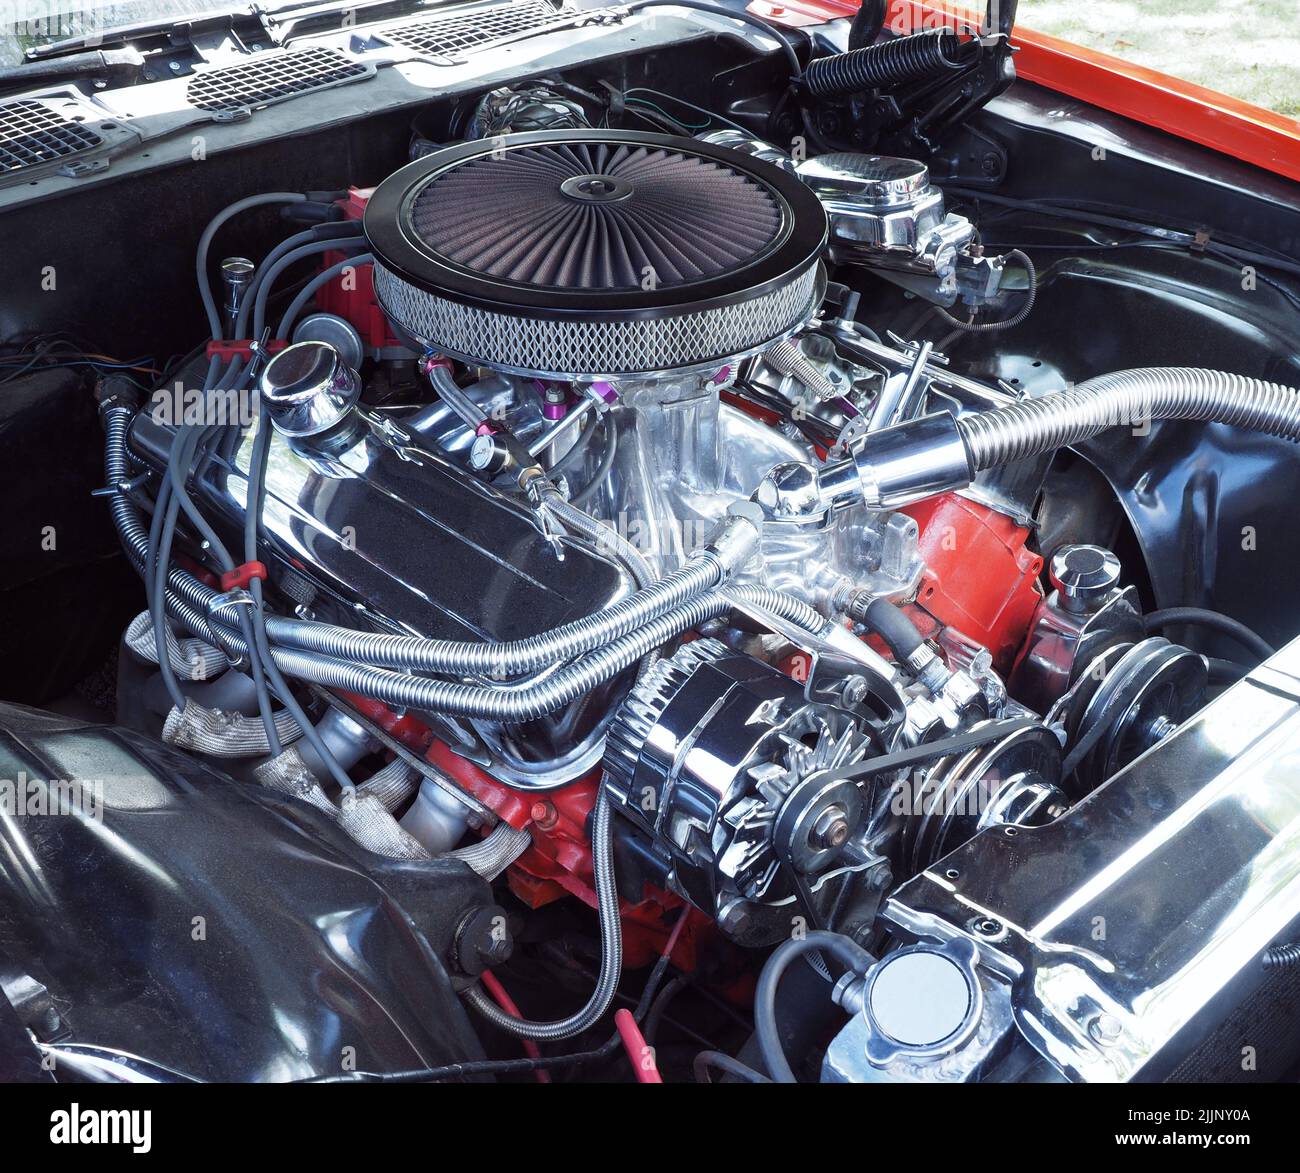 A 1970, Chevy 7.4lt, 454 cubic inch, big block V8 petrol engine. Chrome radiator, water hoses and fuel lines etc. No logos. Stock Photo